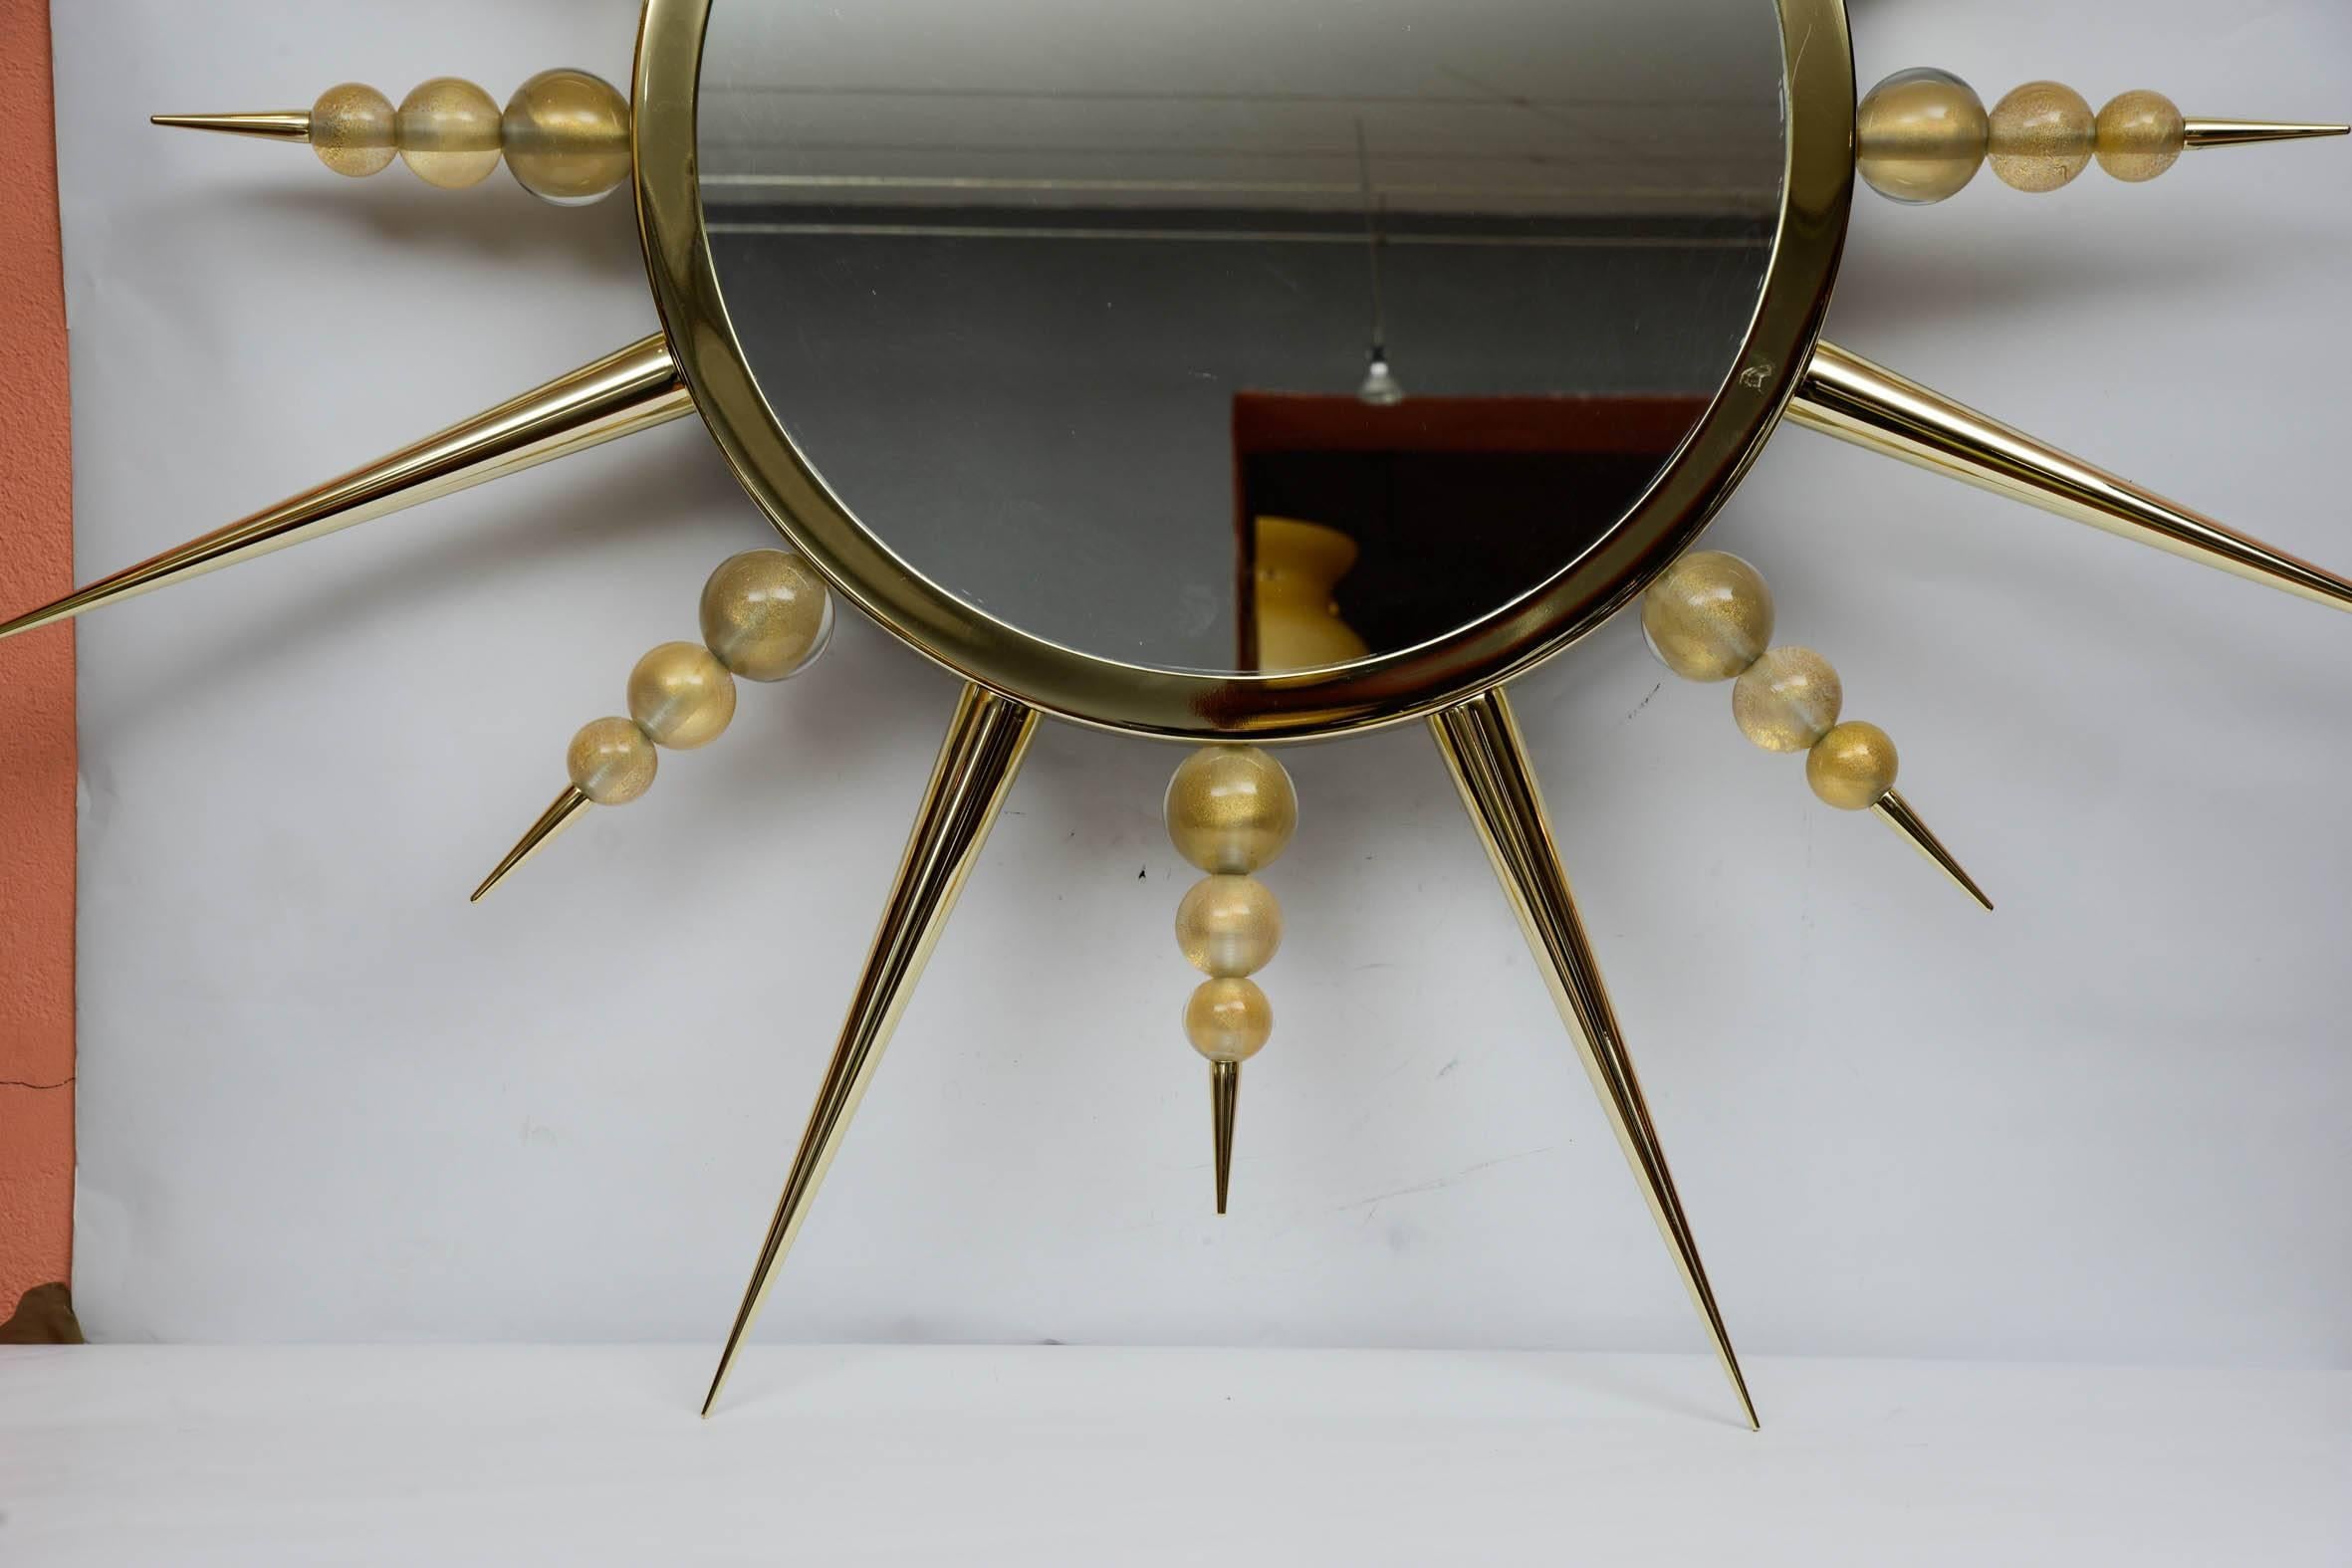 Awesome brass mirror with Murano glass balls.
Possibility of second one.